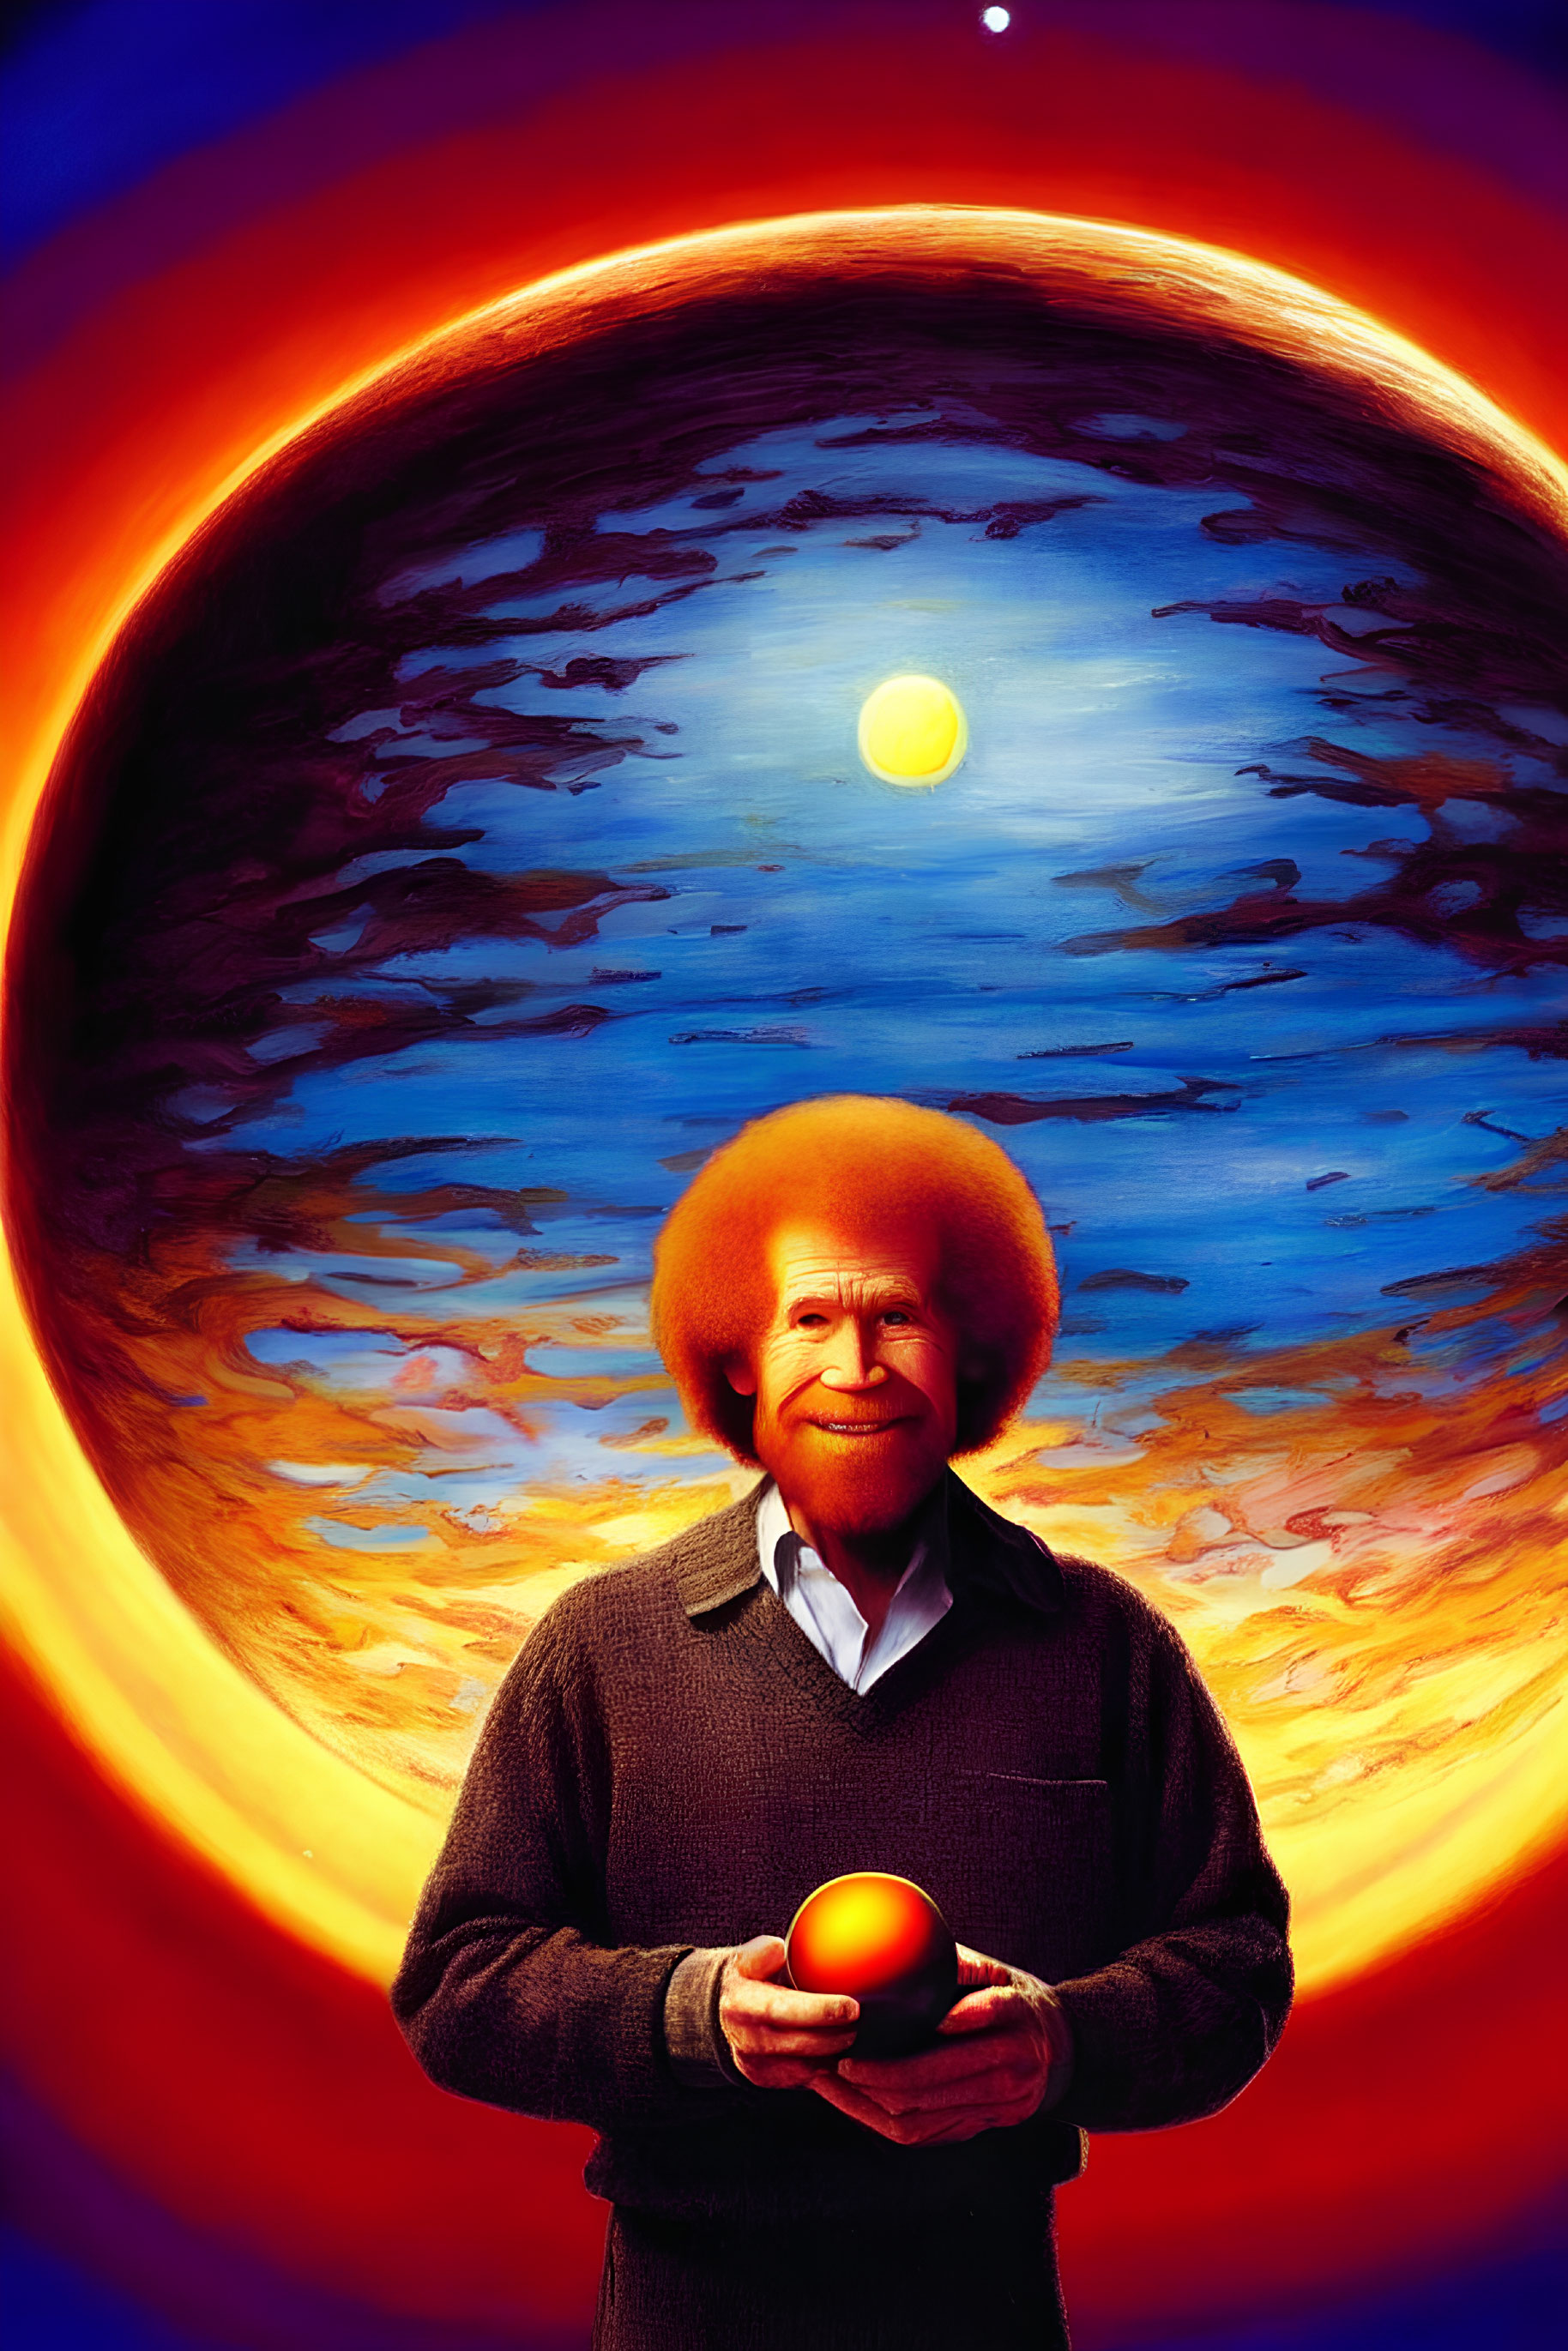 Person with Afro Holding Apple in Front of Vibrant Circular Sunset Painting